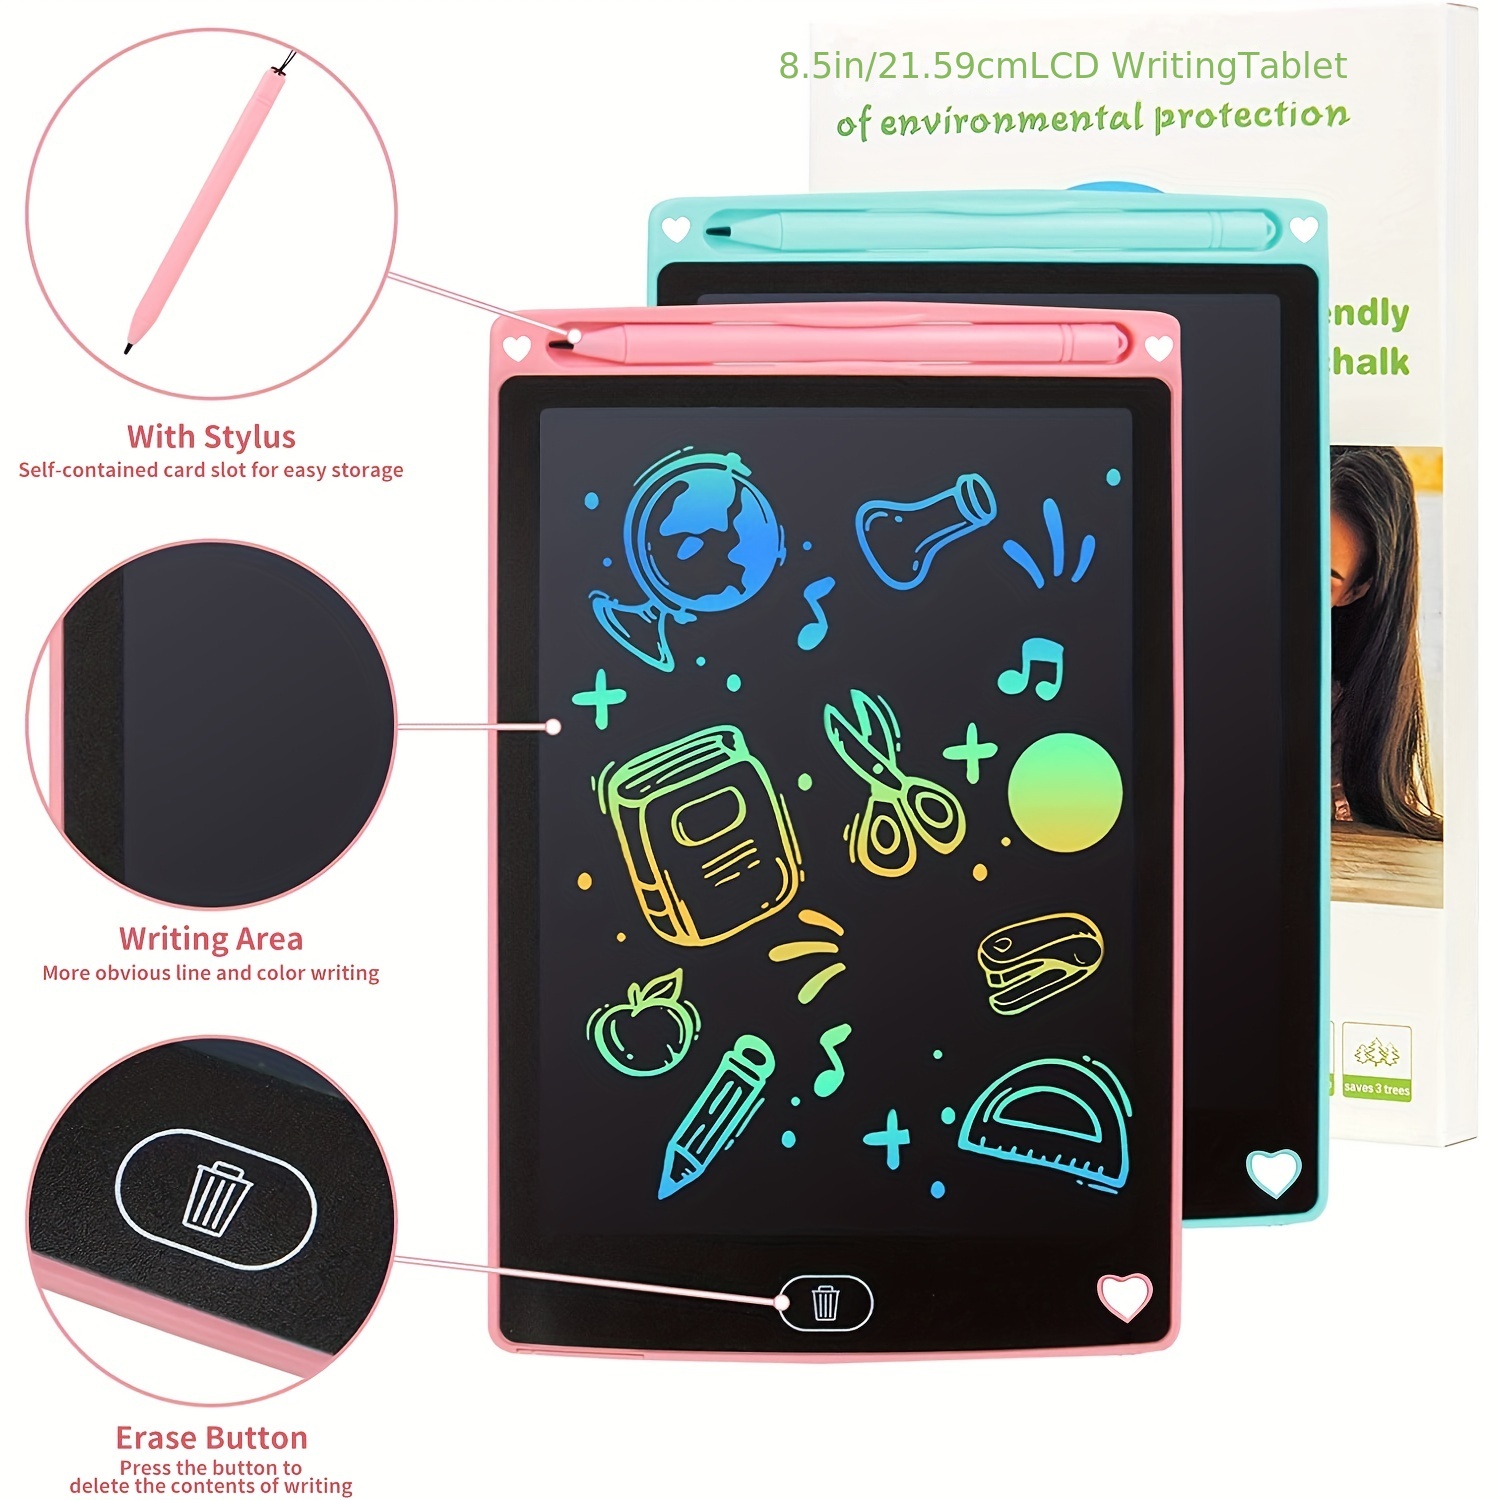 LCD Writing Tablet for Kids,10.5 inch Eye Protection Monochrome